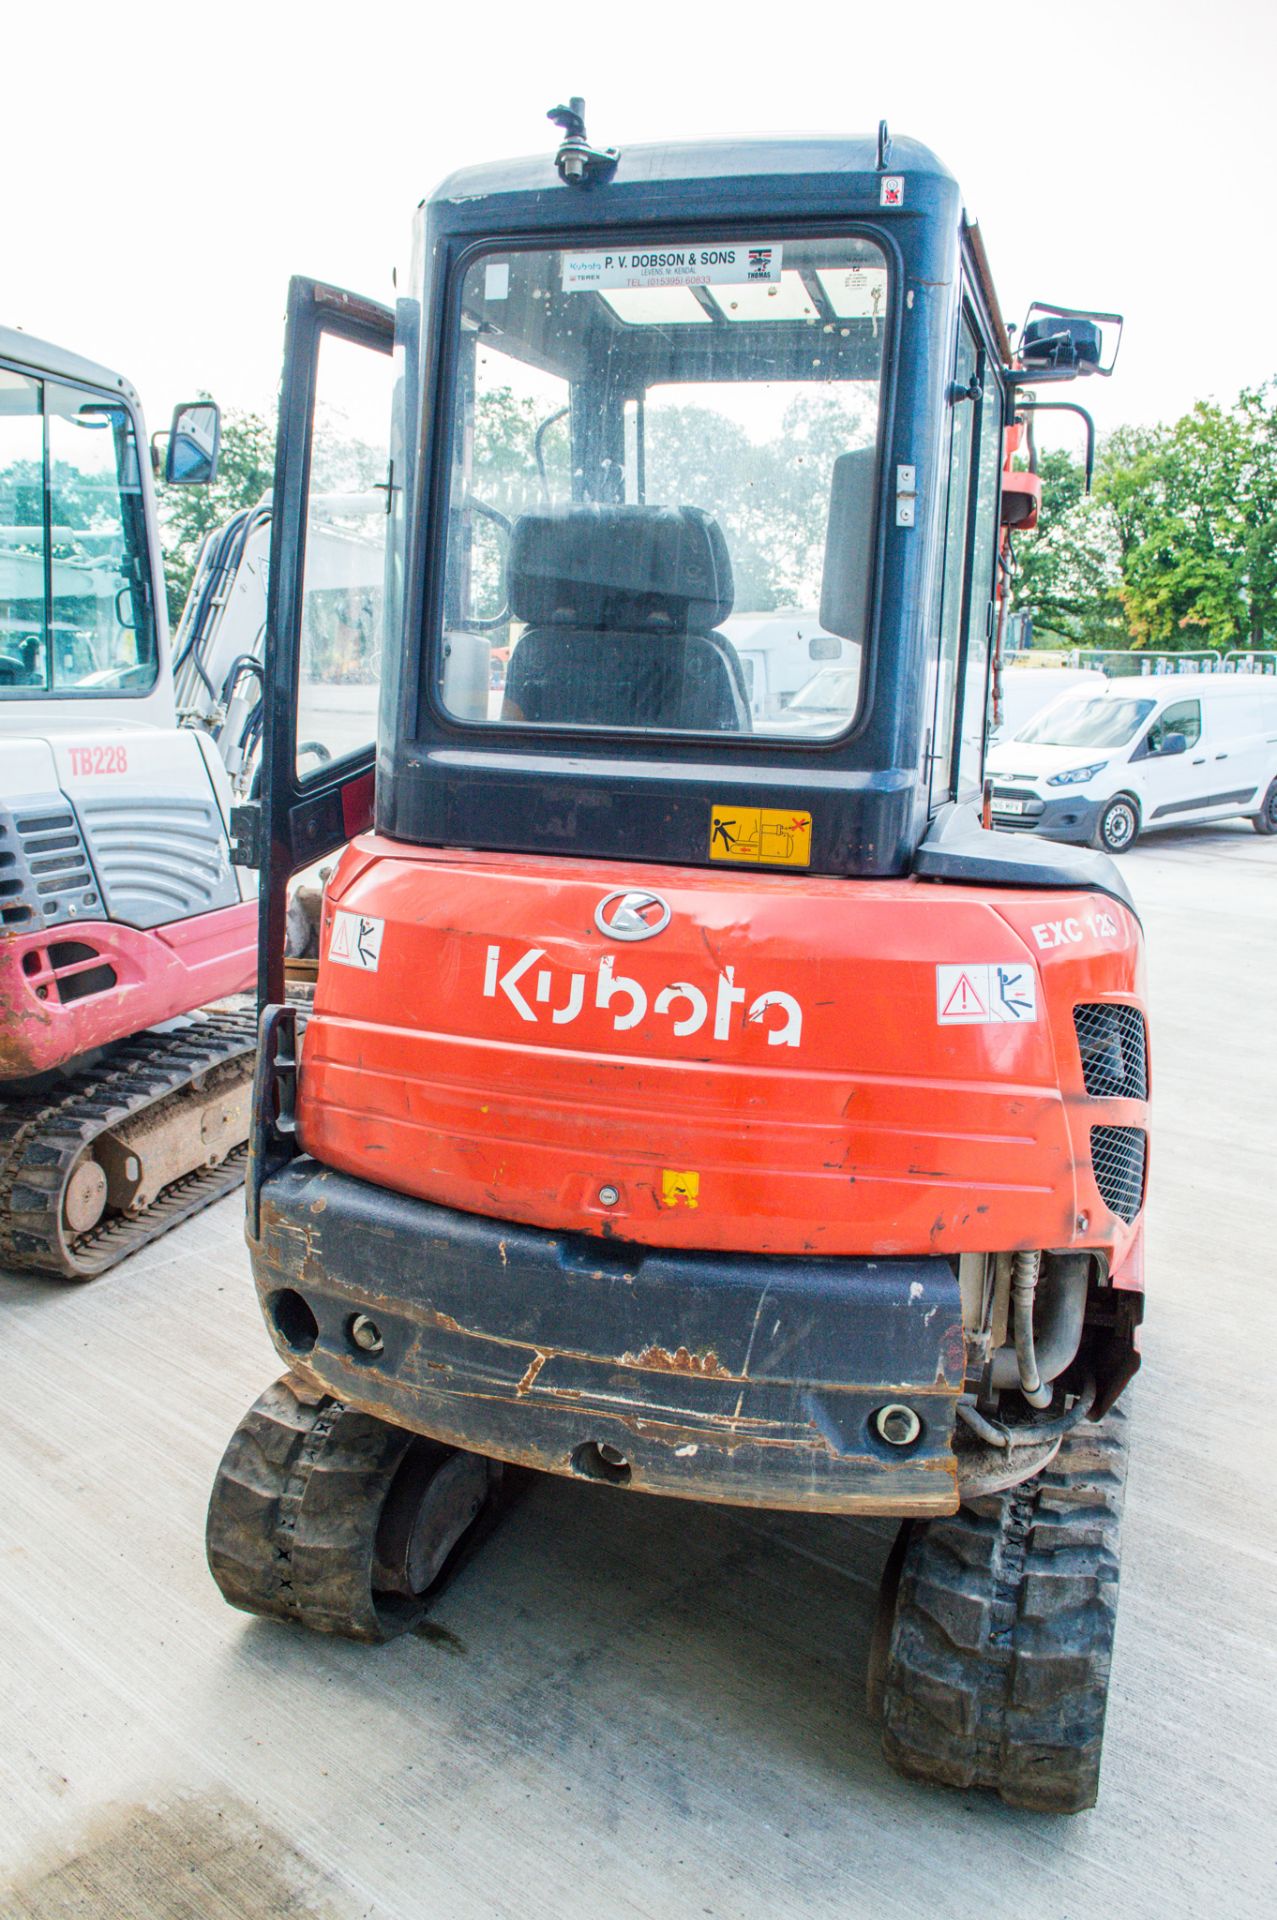 Kubota KX61-3 2.6 tonne rubber tracked excavator  Year: 2014 S/N: 80674 Recorded hours: 3355 piped & - Image 7 of 15